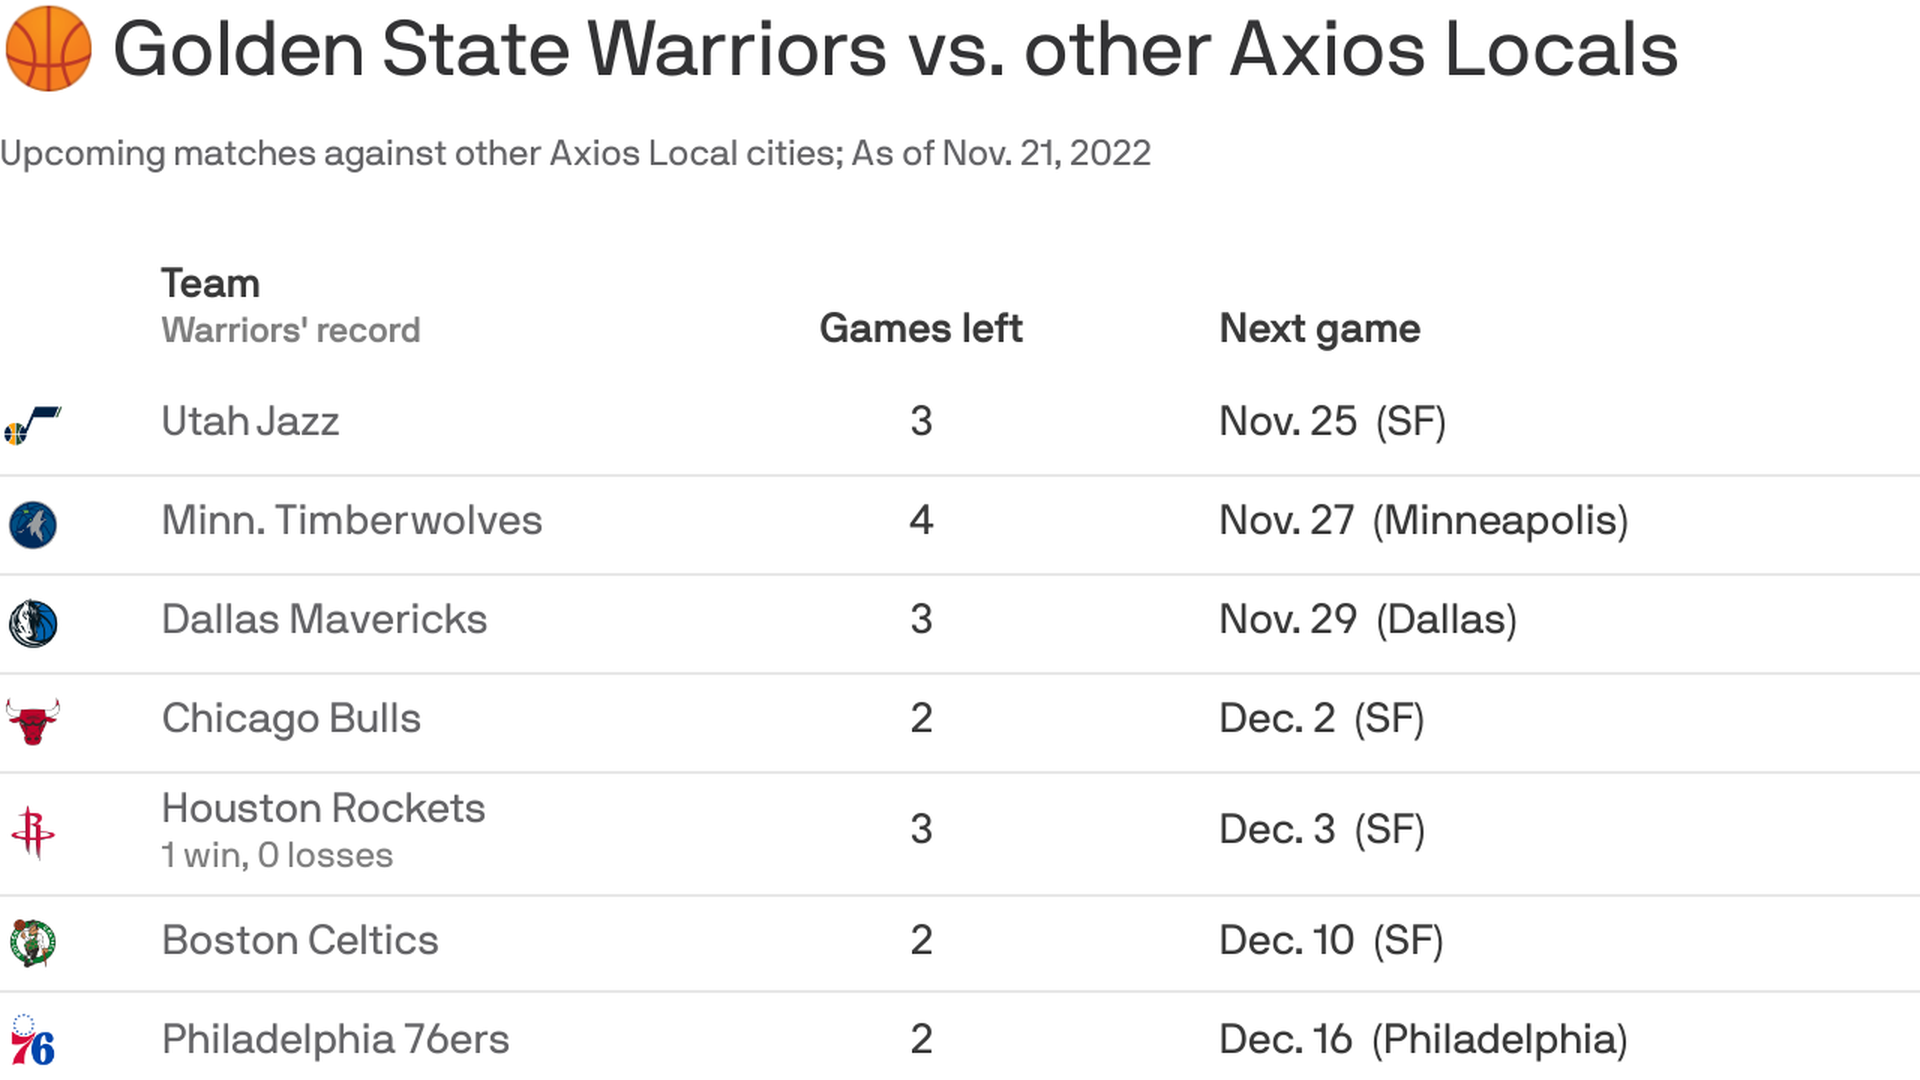 Chart showing how the Warriors compare to other Axios Locals